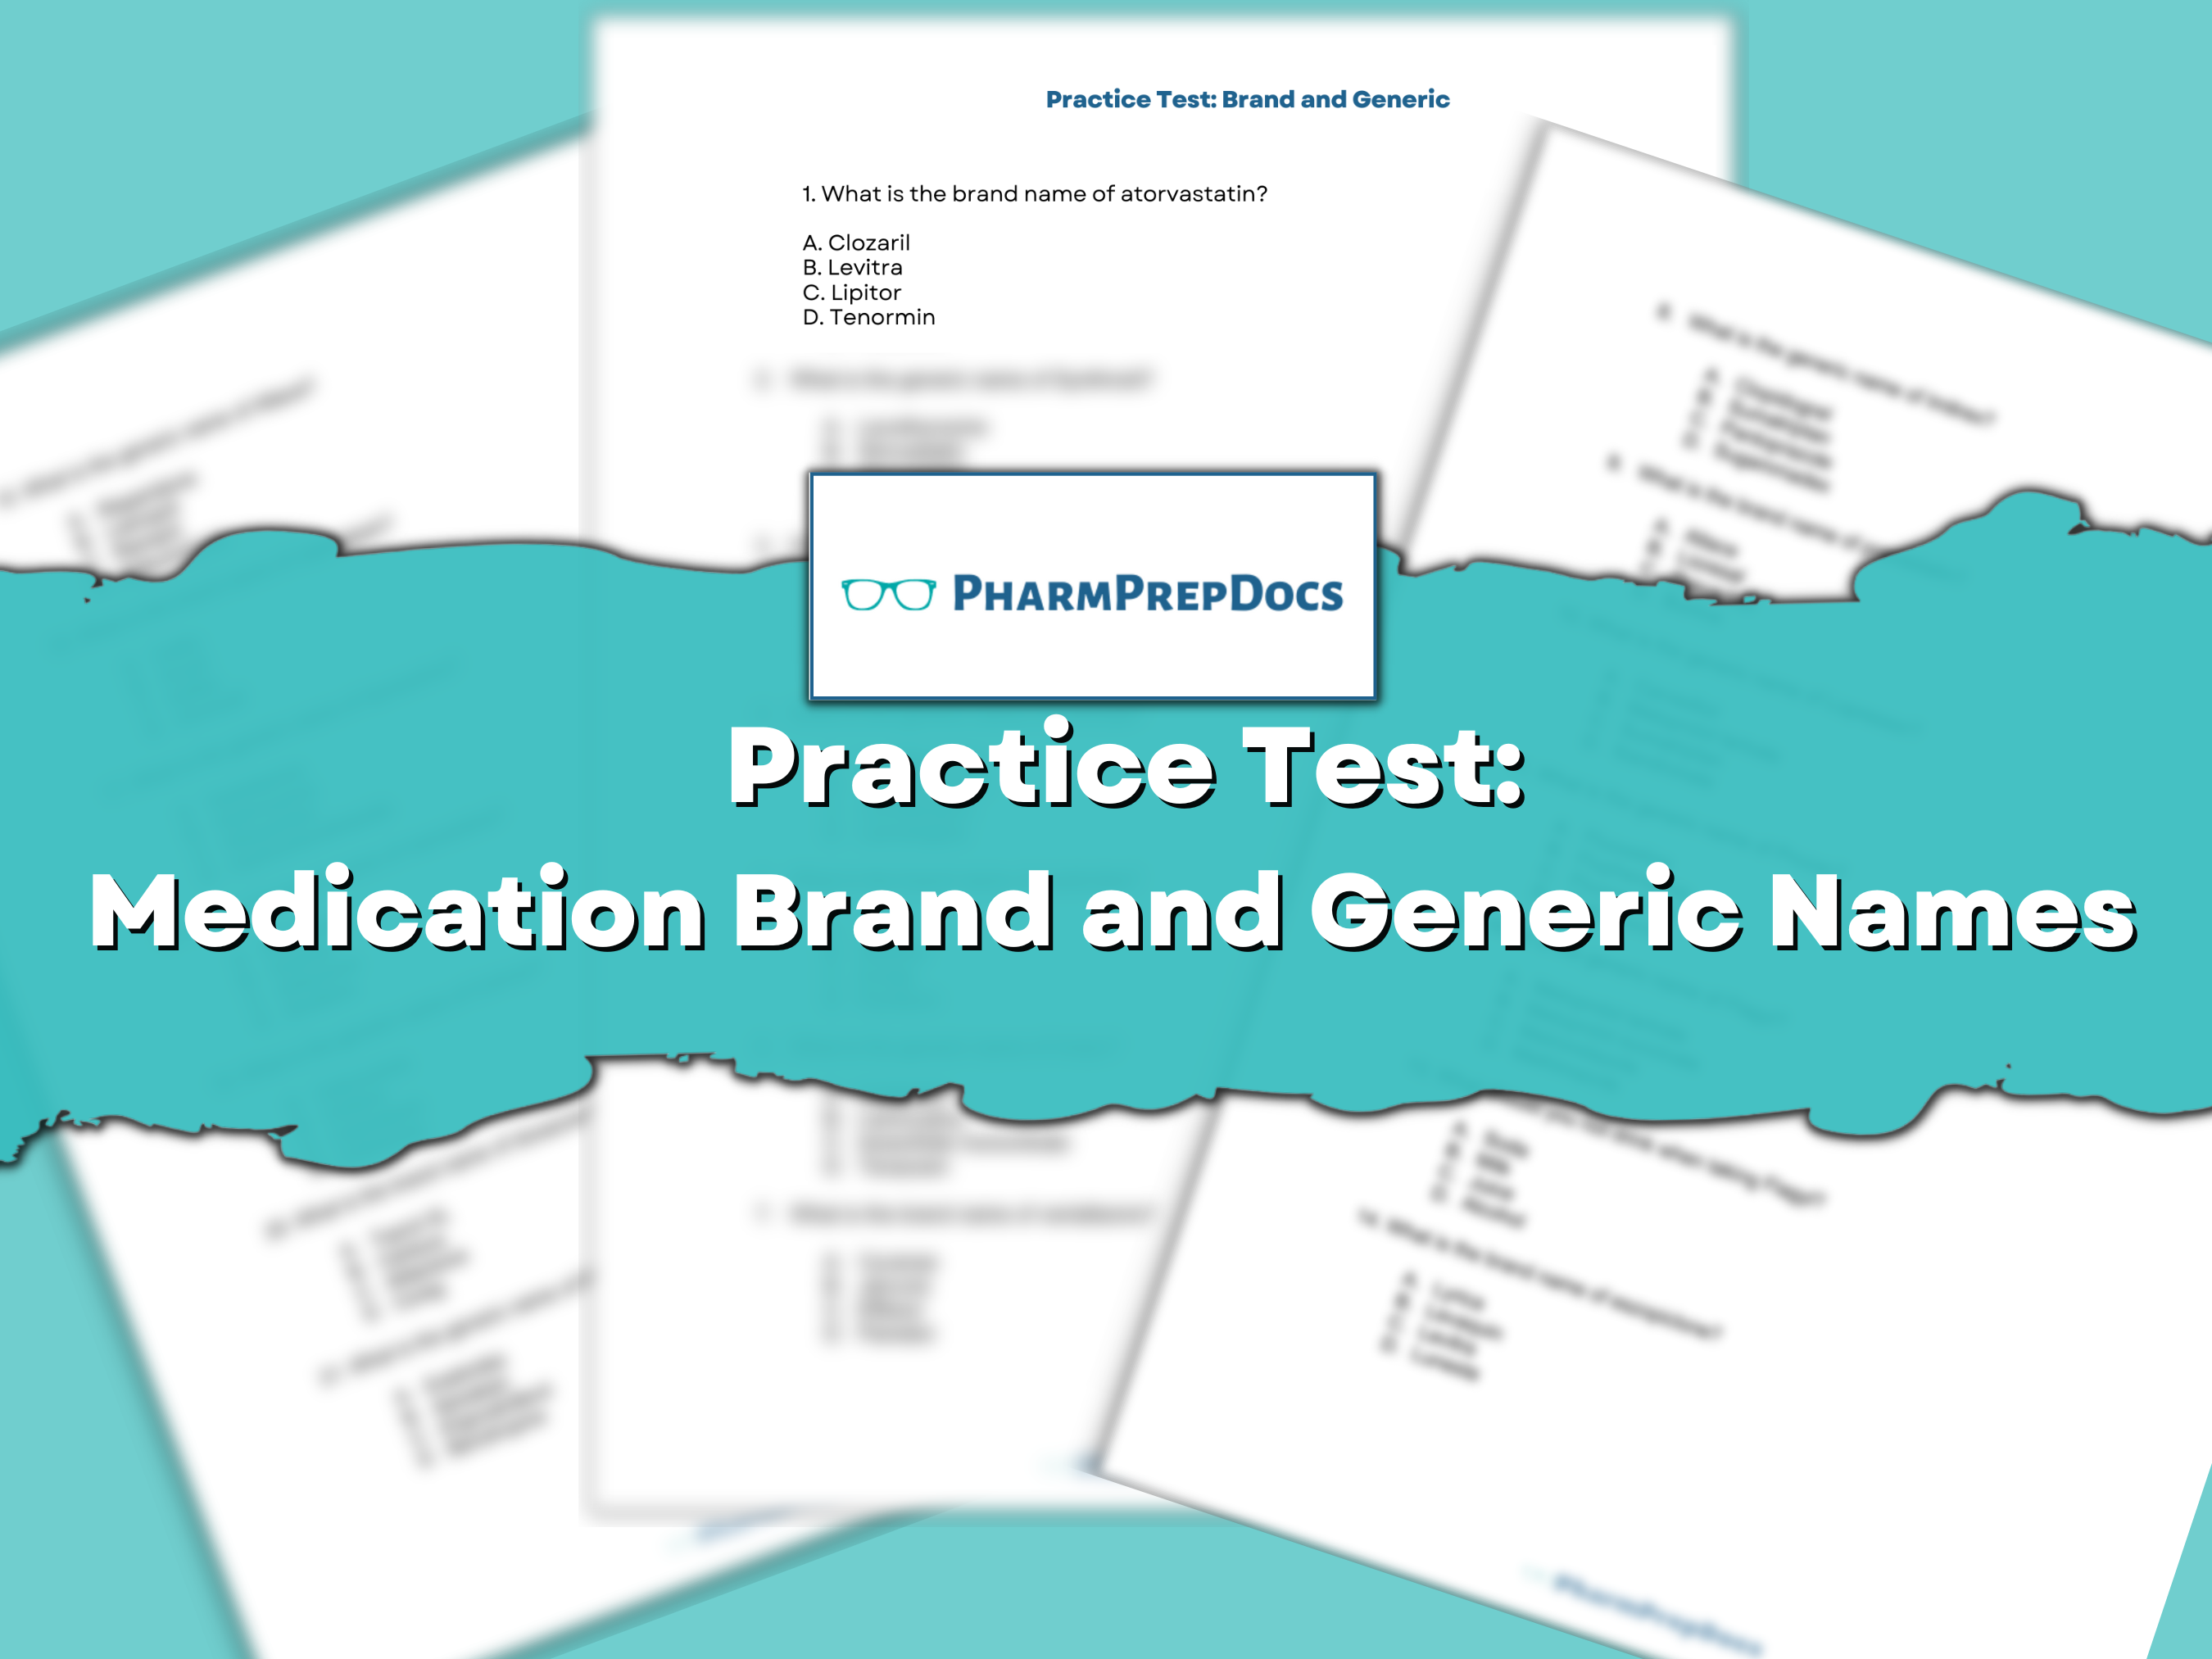 Practice Test: Medication Brand and Generic Names